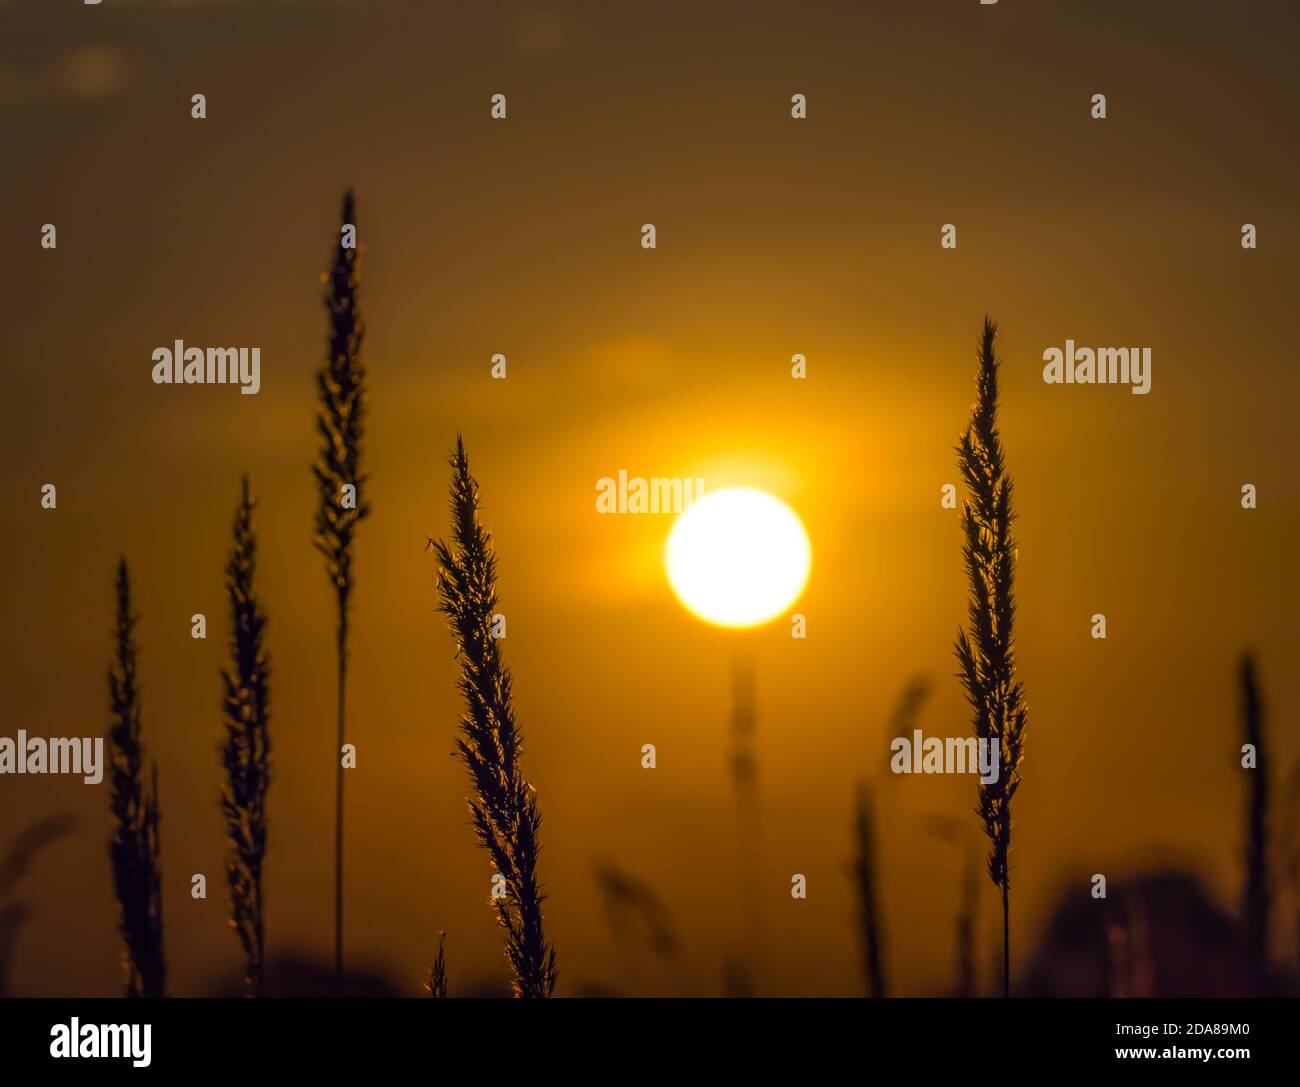 Silhouettes of spikelets of field grasses against the background of the rising sun in the July field Stock Photo